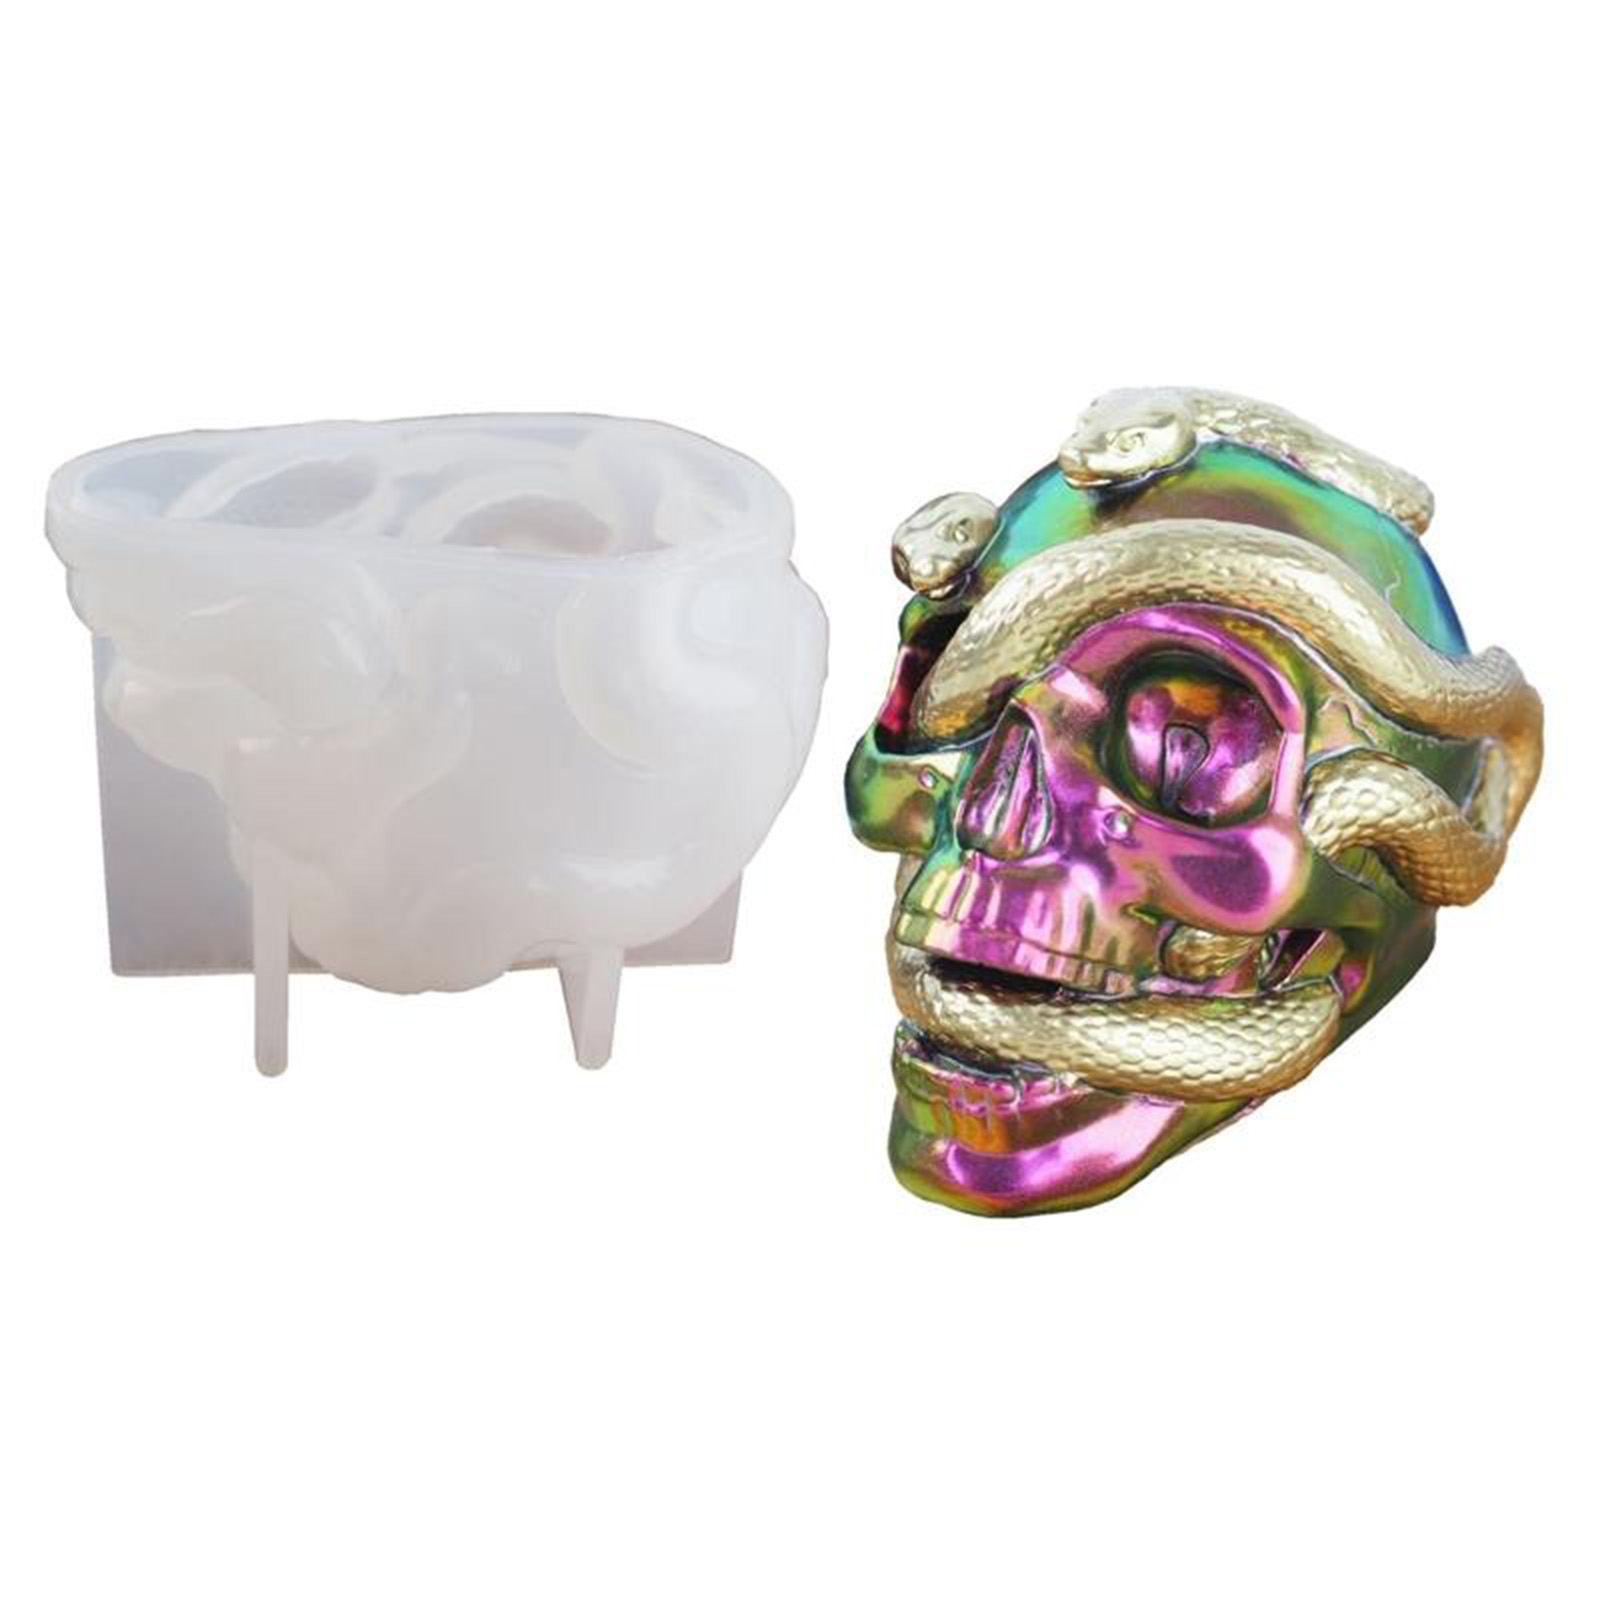 Resin Molds Silicone - 3D Halloween Snake Skull Mold for DIY Candle Crafts